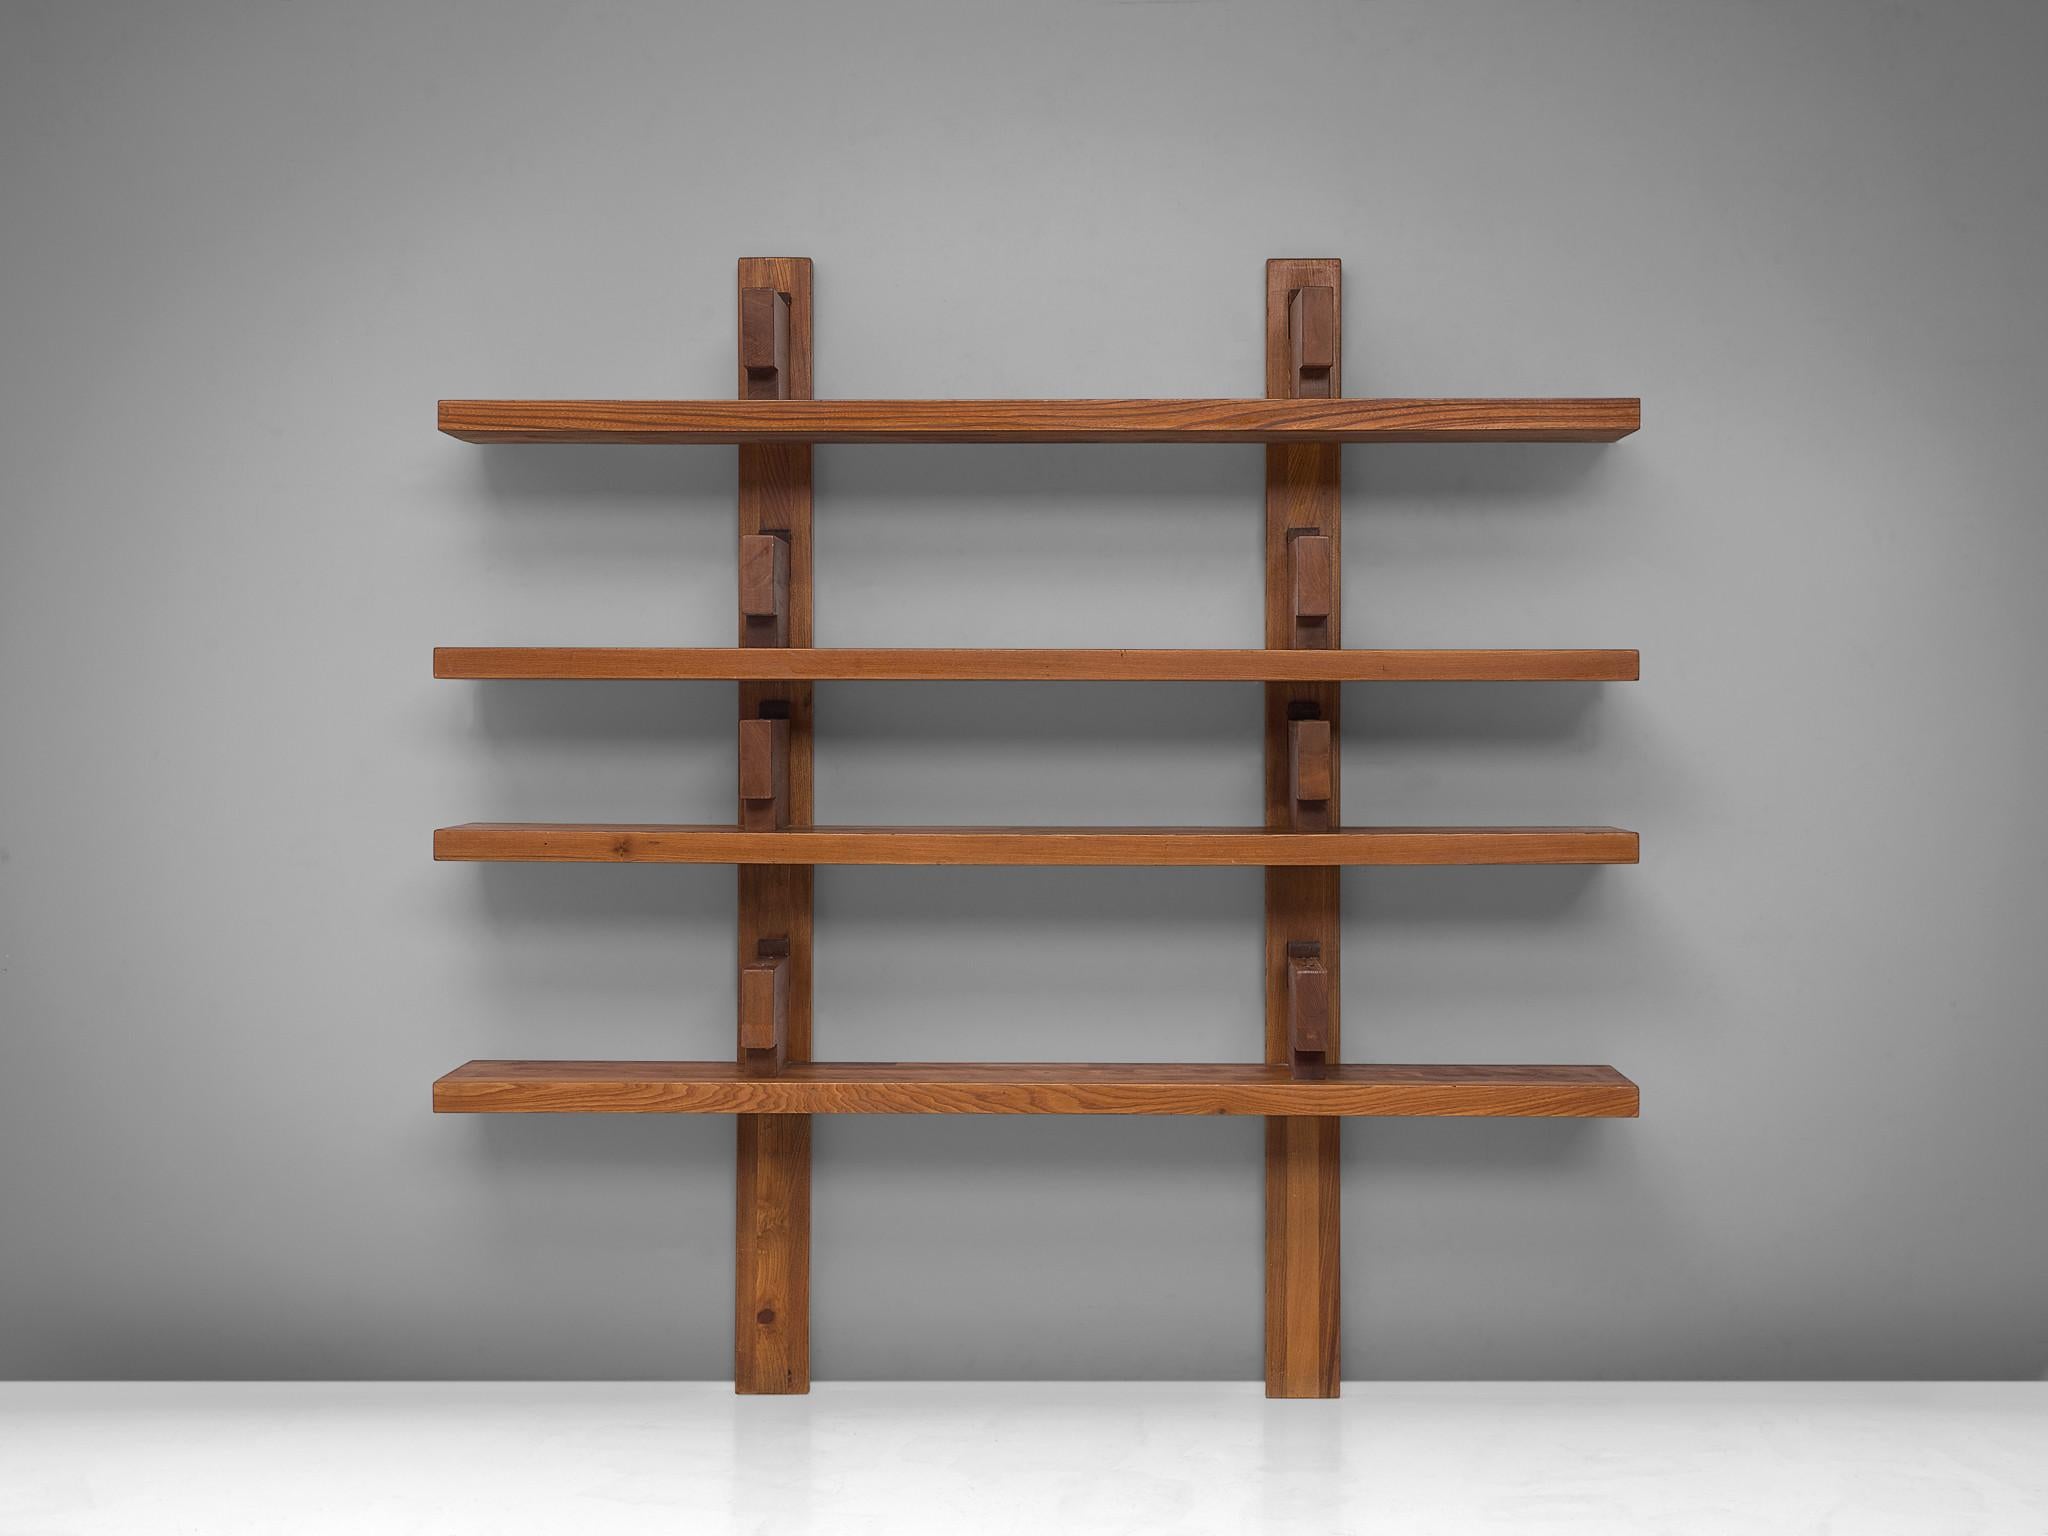 Pierre Chapo, wall unit 'bibliothèque' model B17, elm, France, 1960s

This is a wall-mounted book shelf model 'B17' designed by Pierre Chapo. The shelving system was created in 1967 where it was presented at the Salon des Arts Ménagers. This